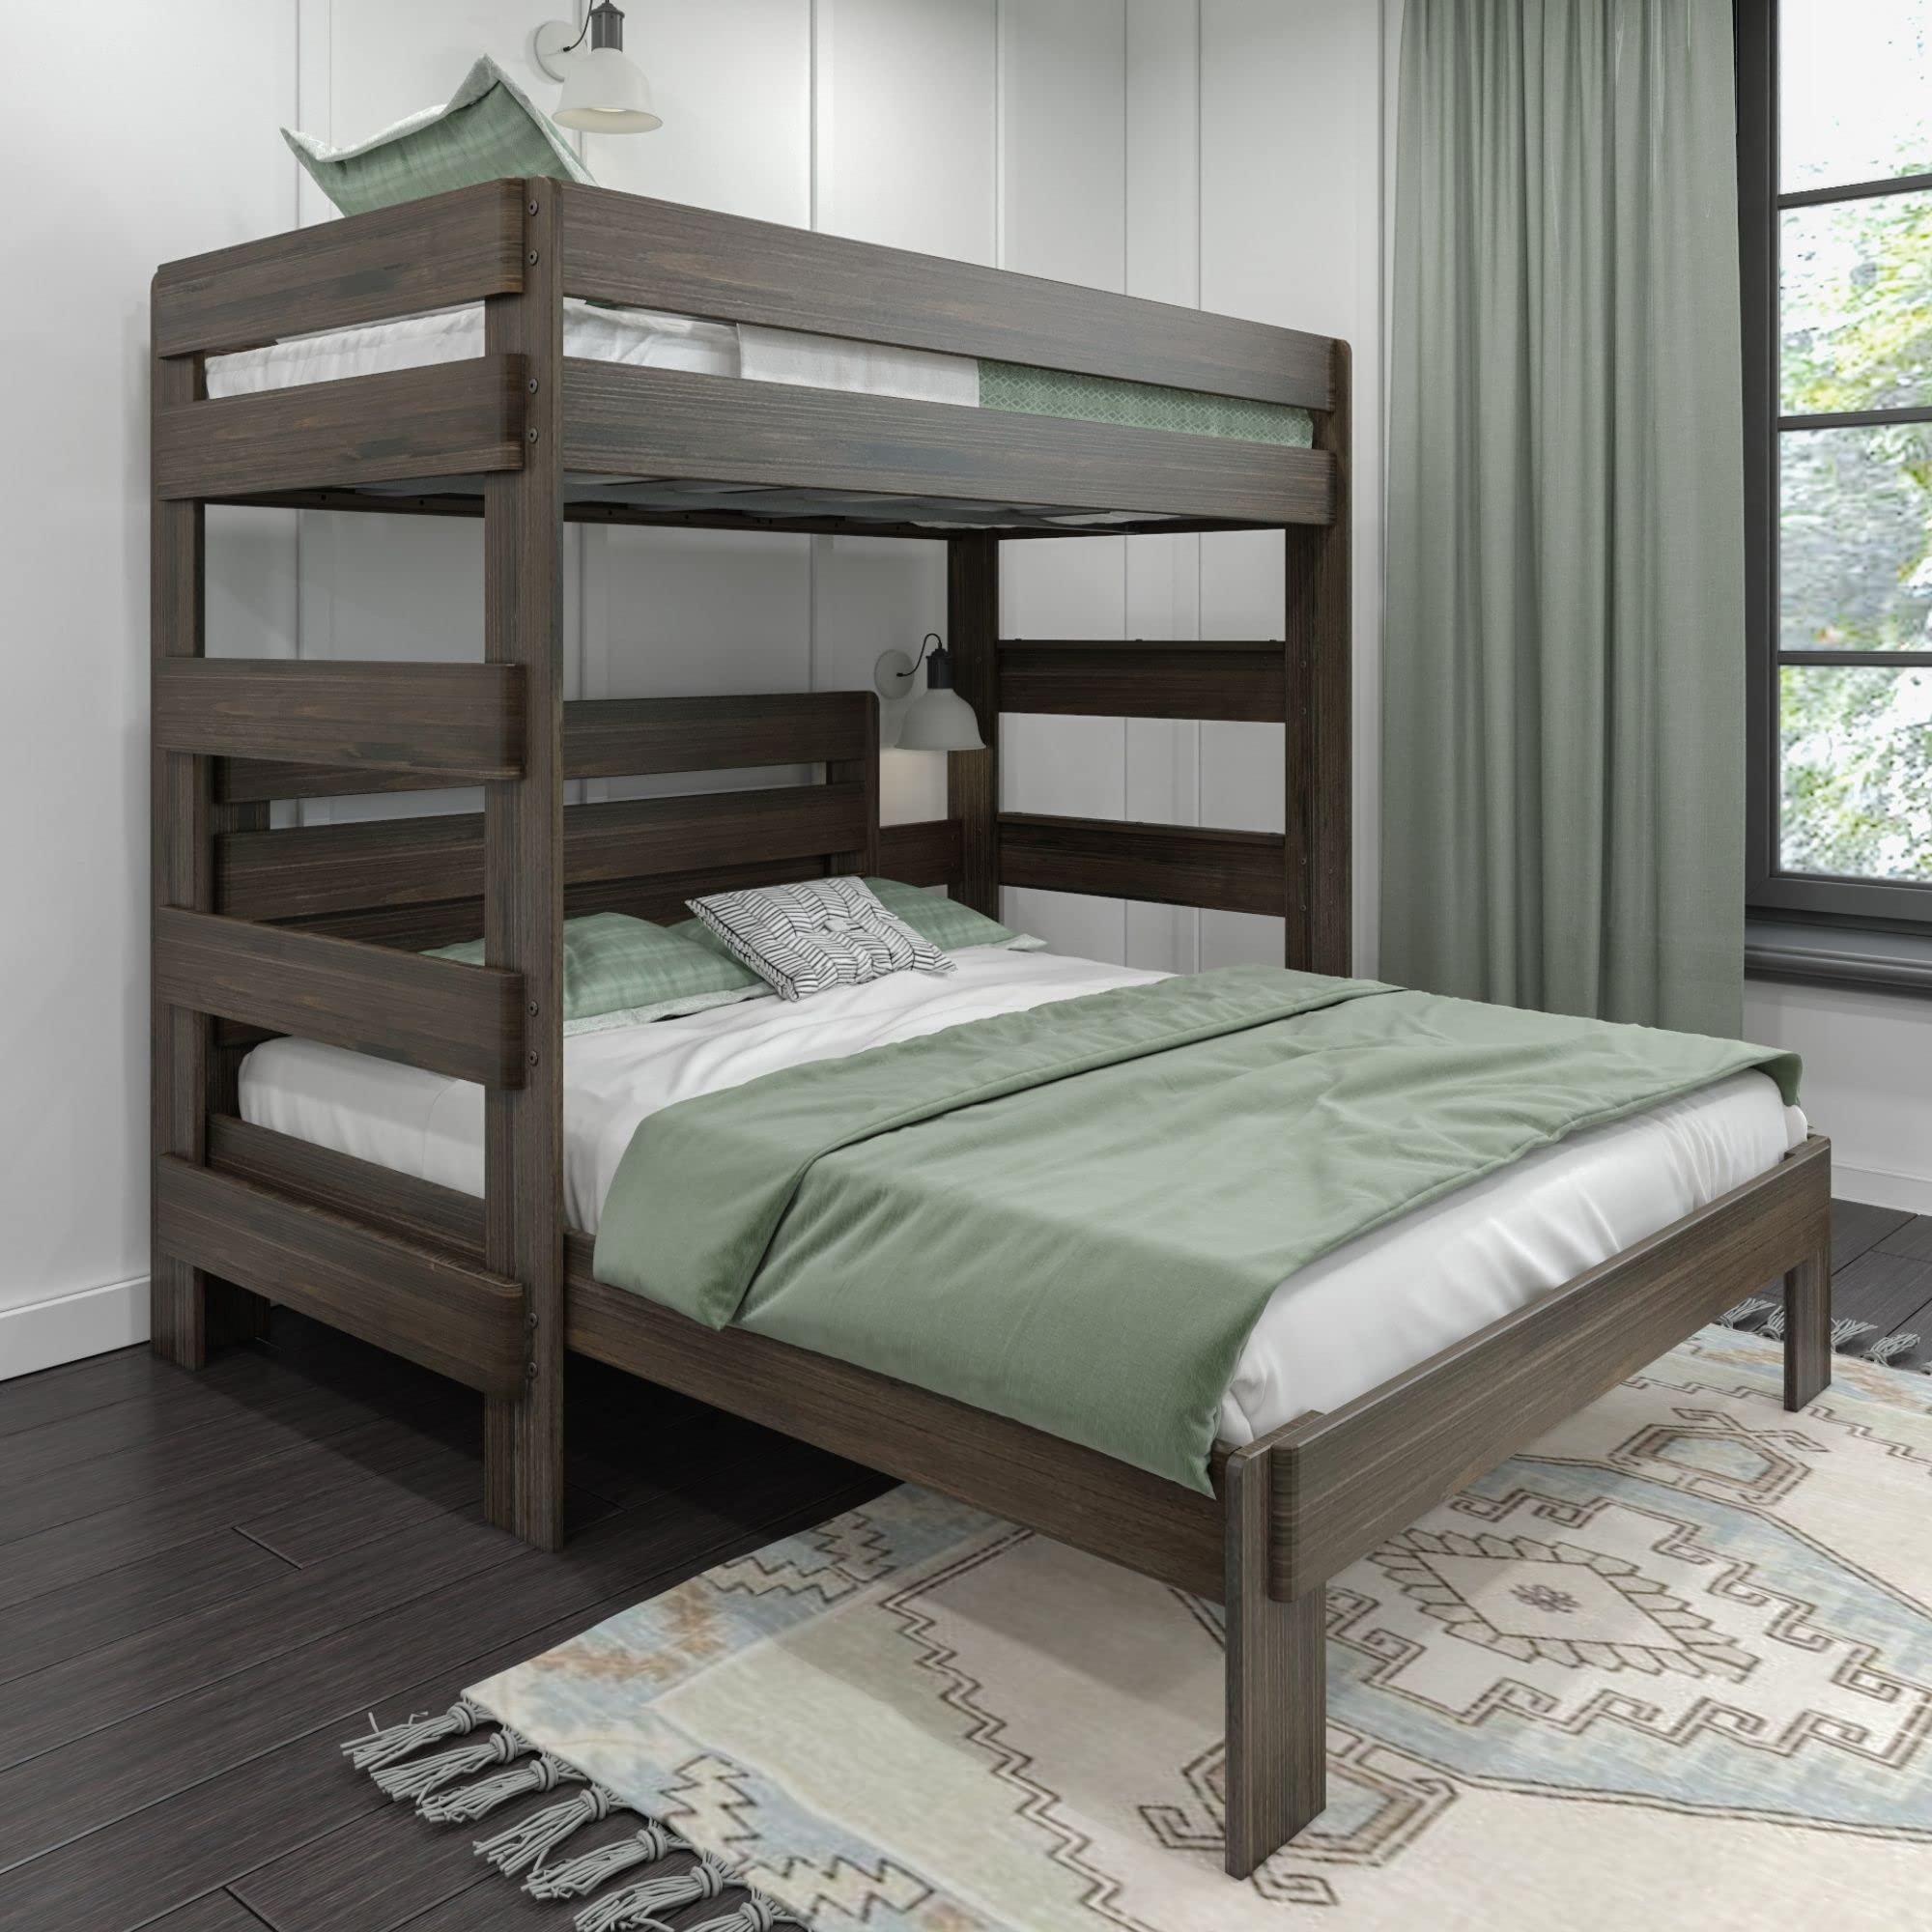 Max & Lily Modern Farmhouse Bunk Bed, L Shape Twin-Over-Queen Bed Frame For Kids, Barnwood Brown